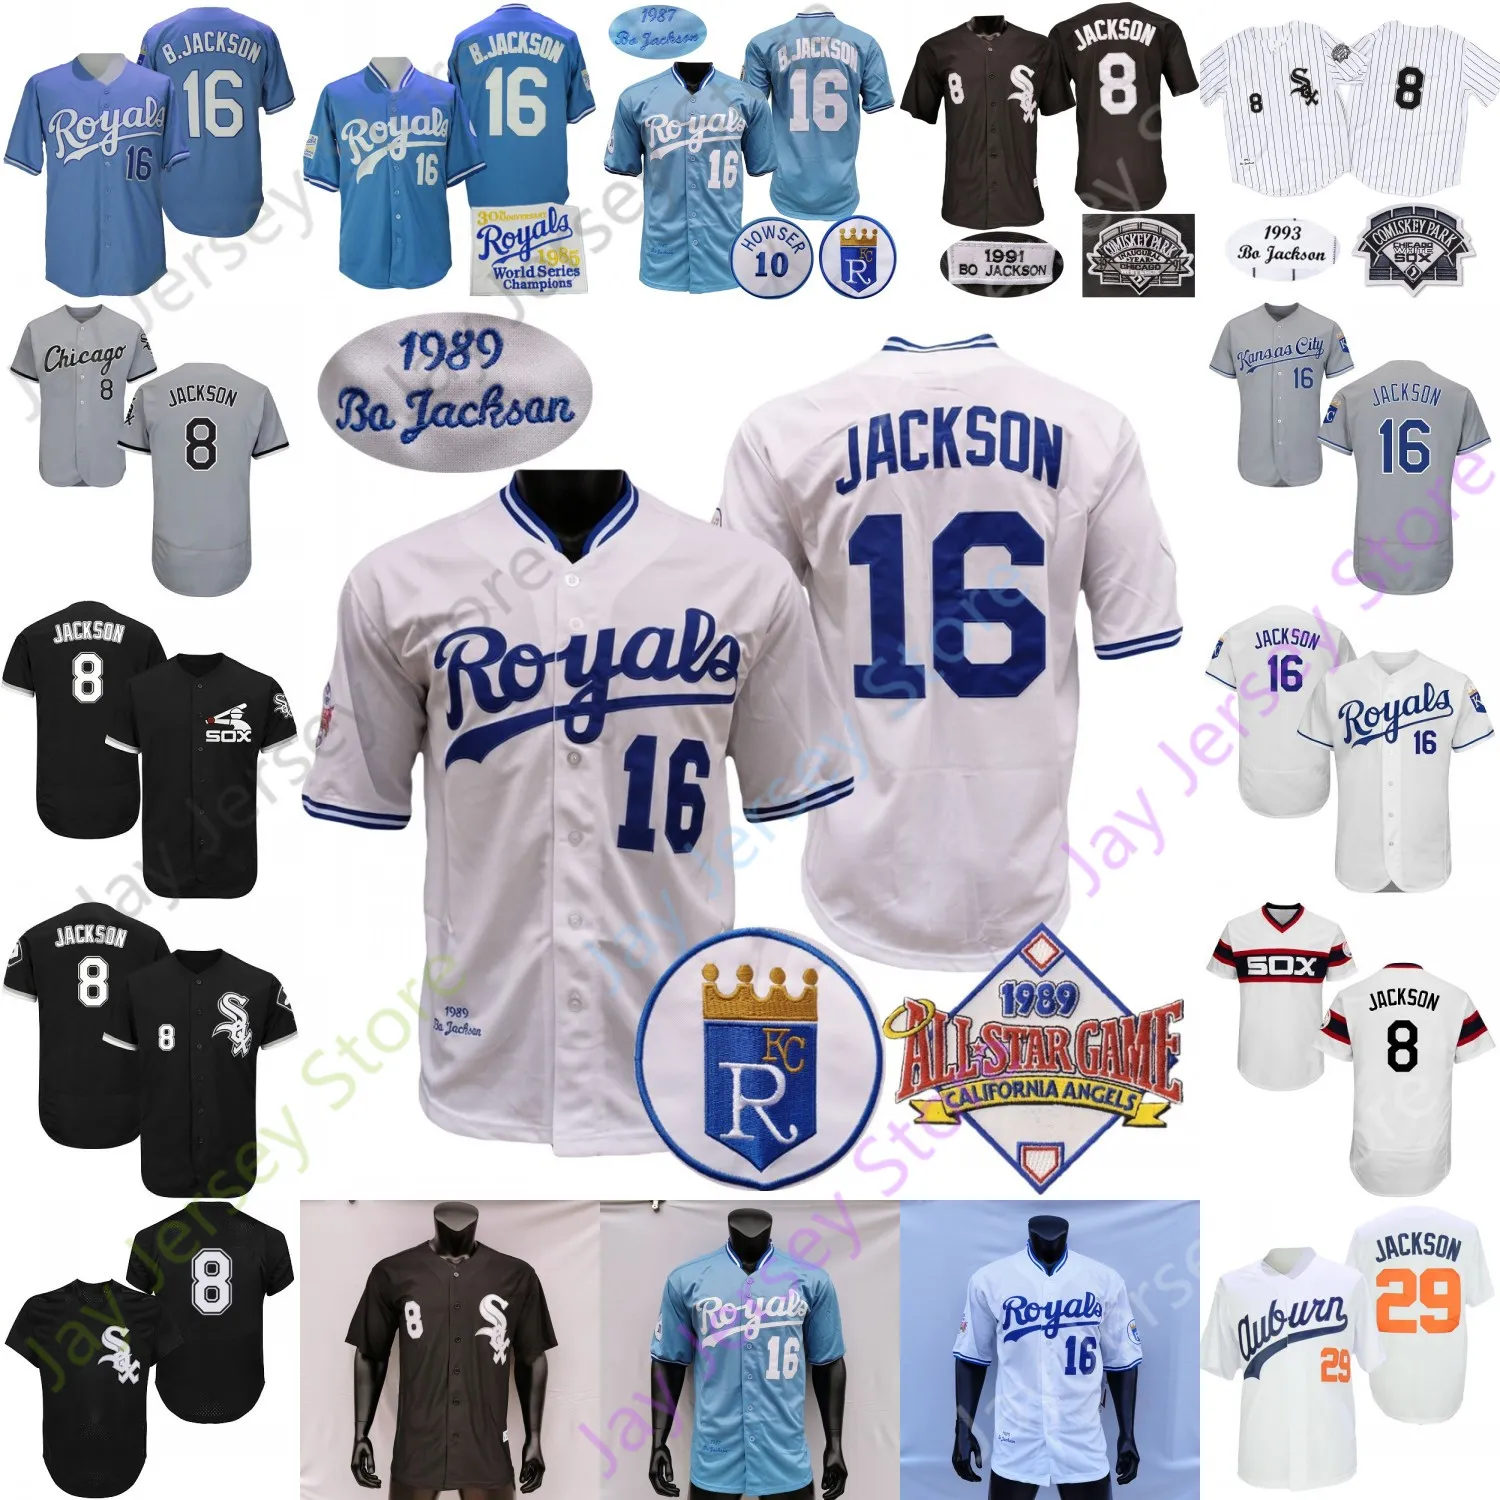 Bo Jackson Jersey Vintage 1985 Gire Back Blue 1987 1989 White Cooperstown College Baseball Asg Patch Gris Negro Tamaño Adulto